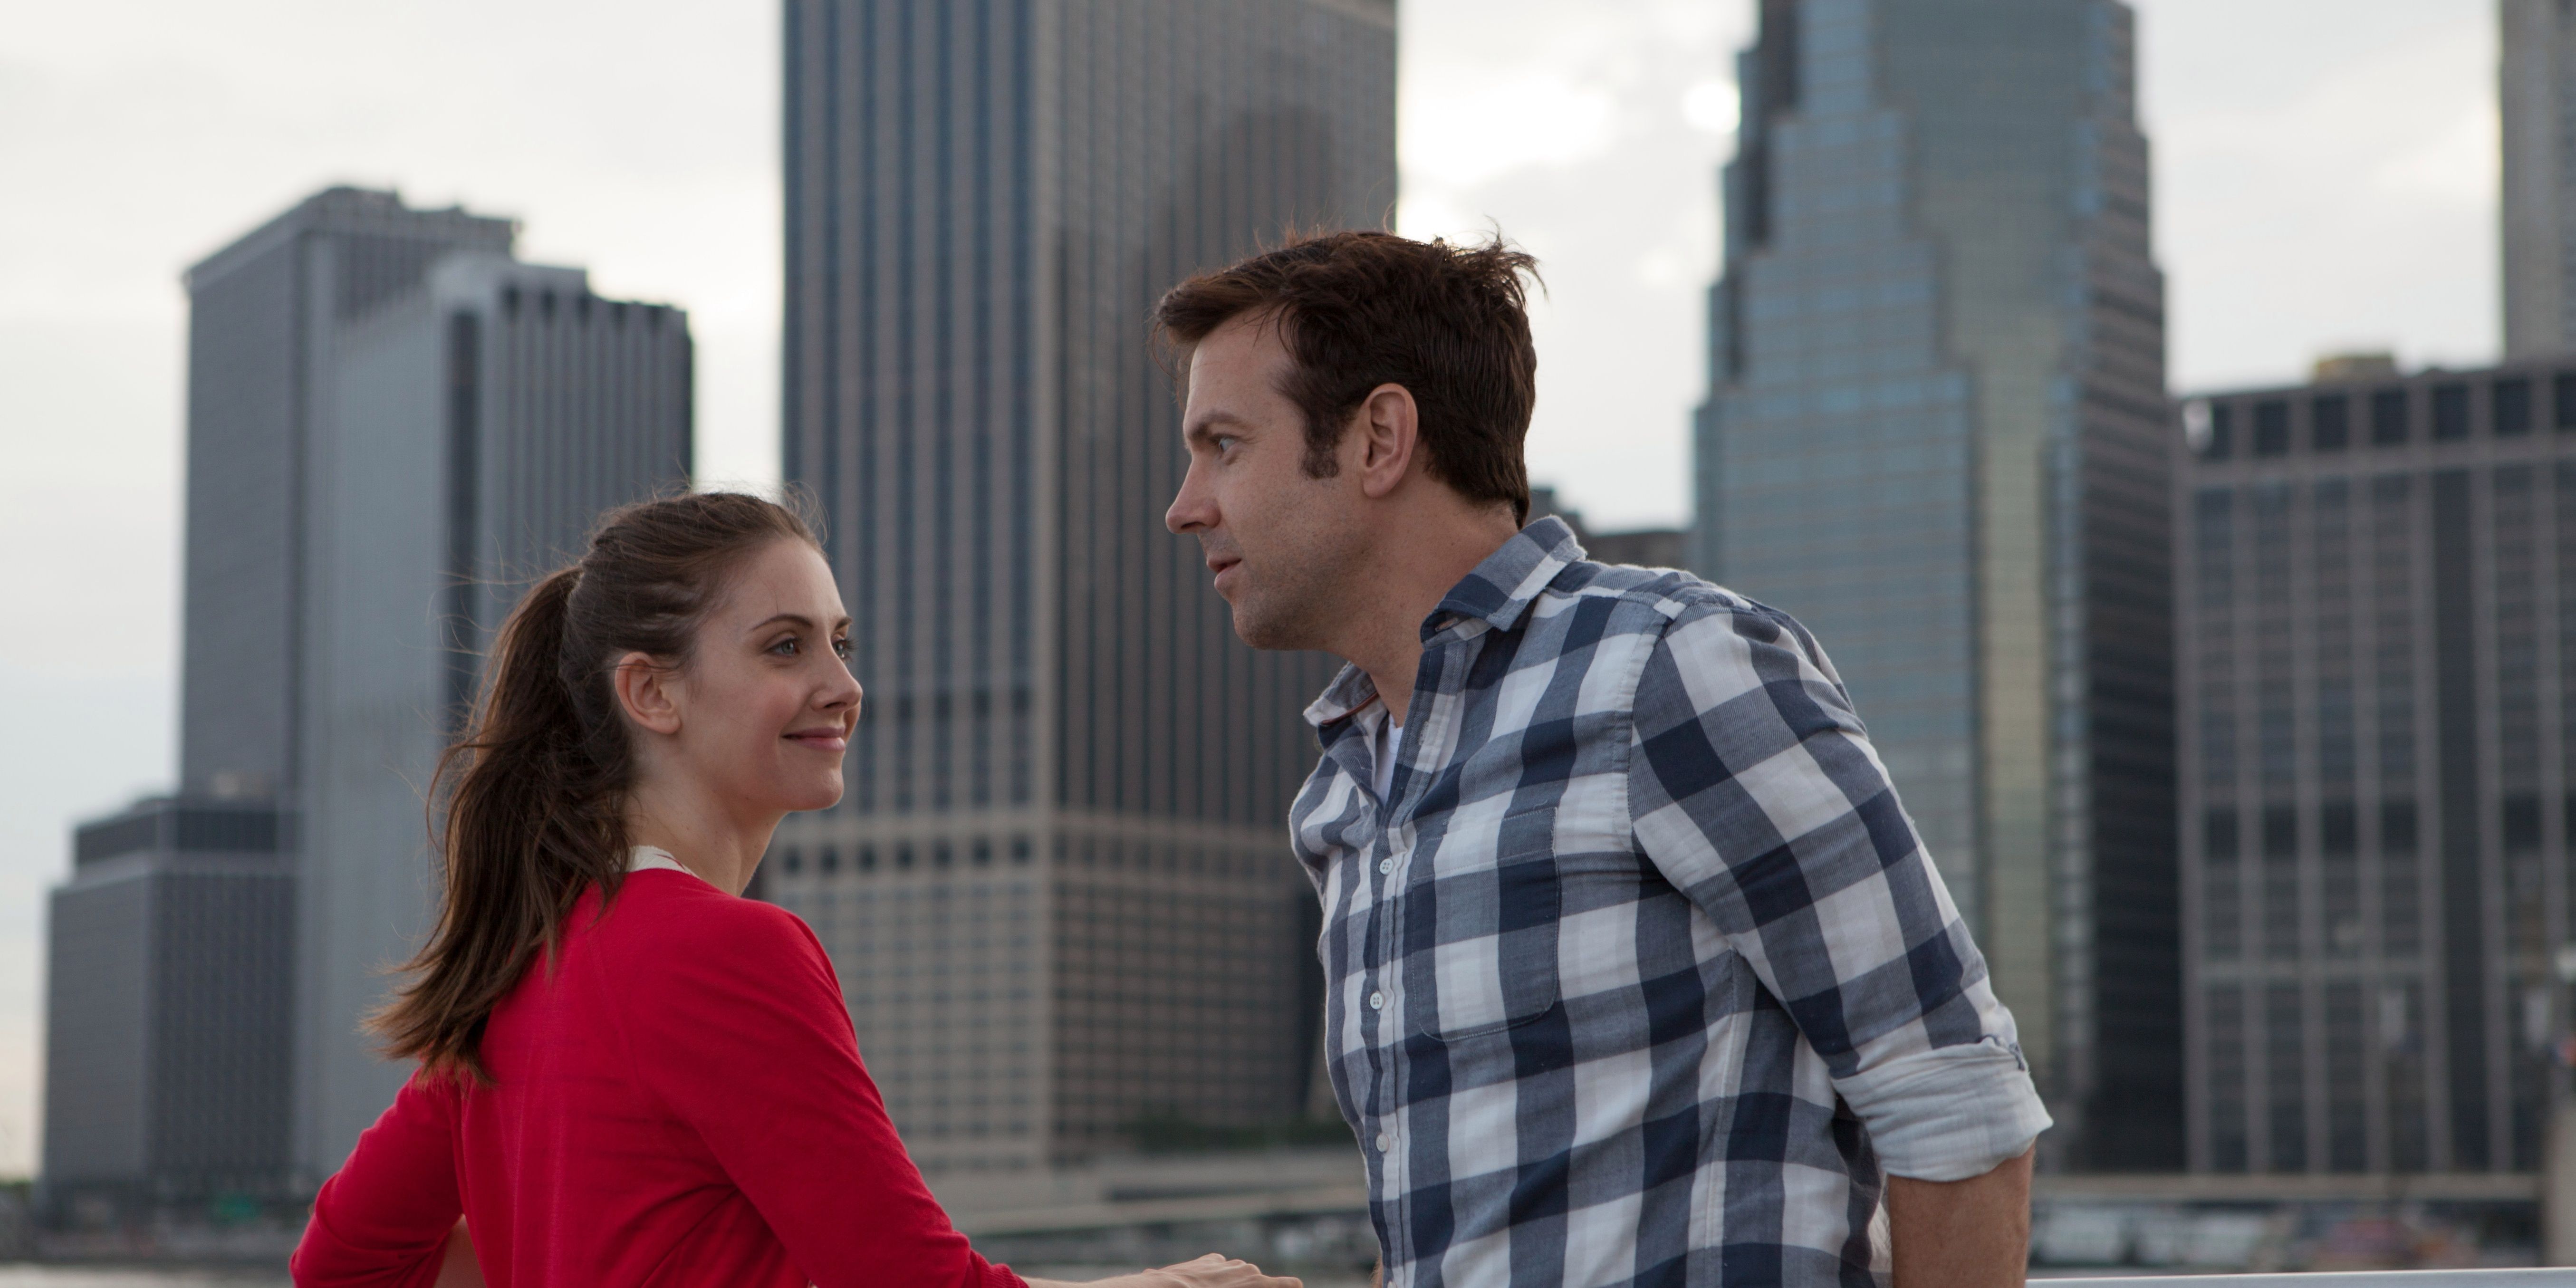 Alison Brie and Jason Sudeikis in Sleeping With Other People standing with the city in background